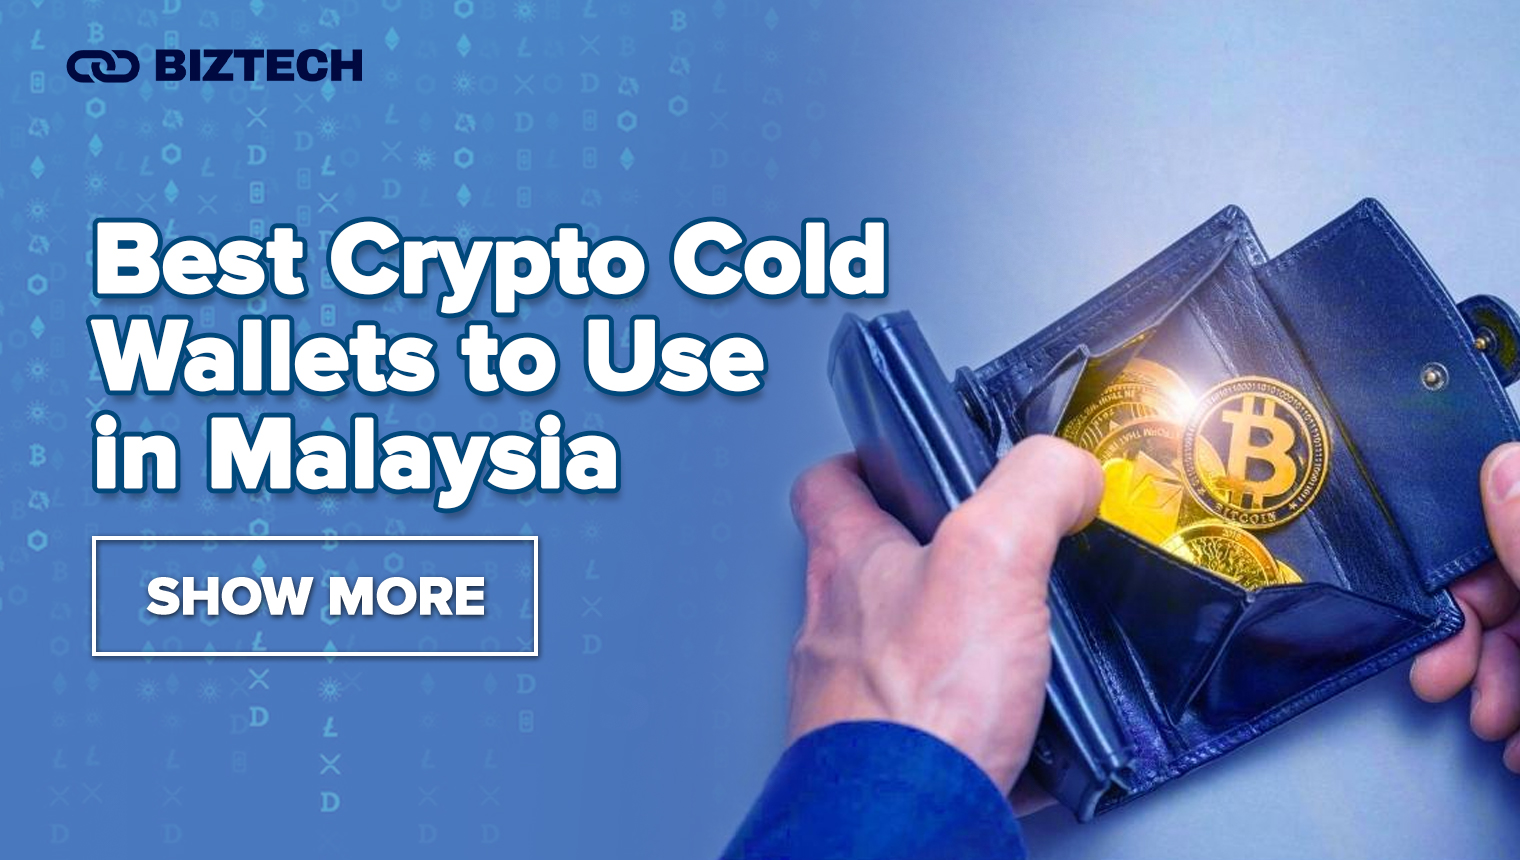 Best Crypto Cold Wallets to Use in Malaysia